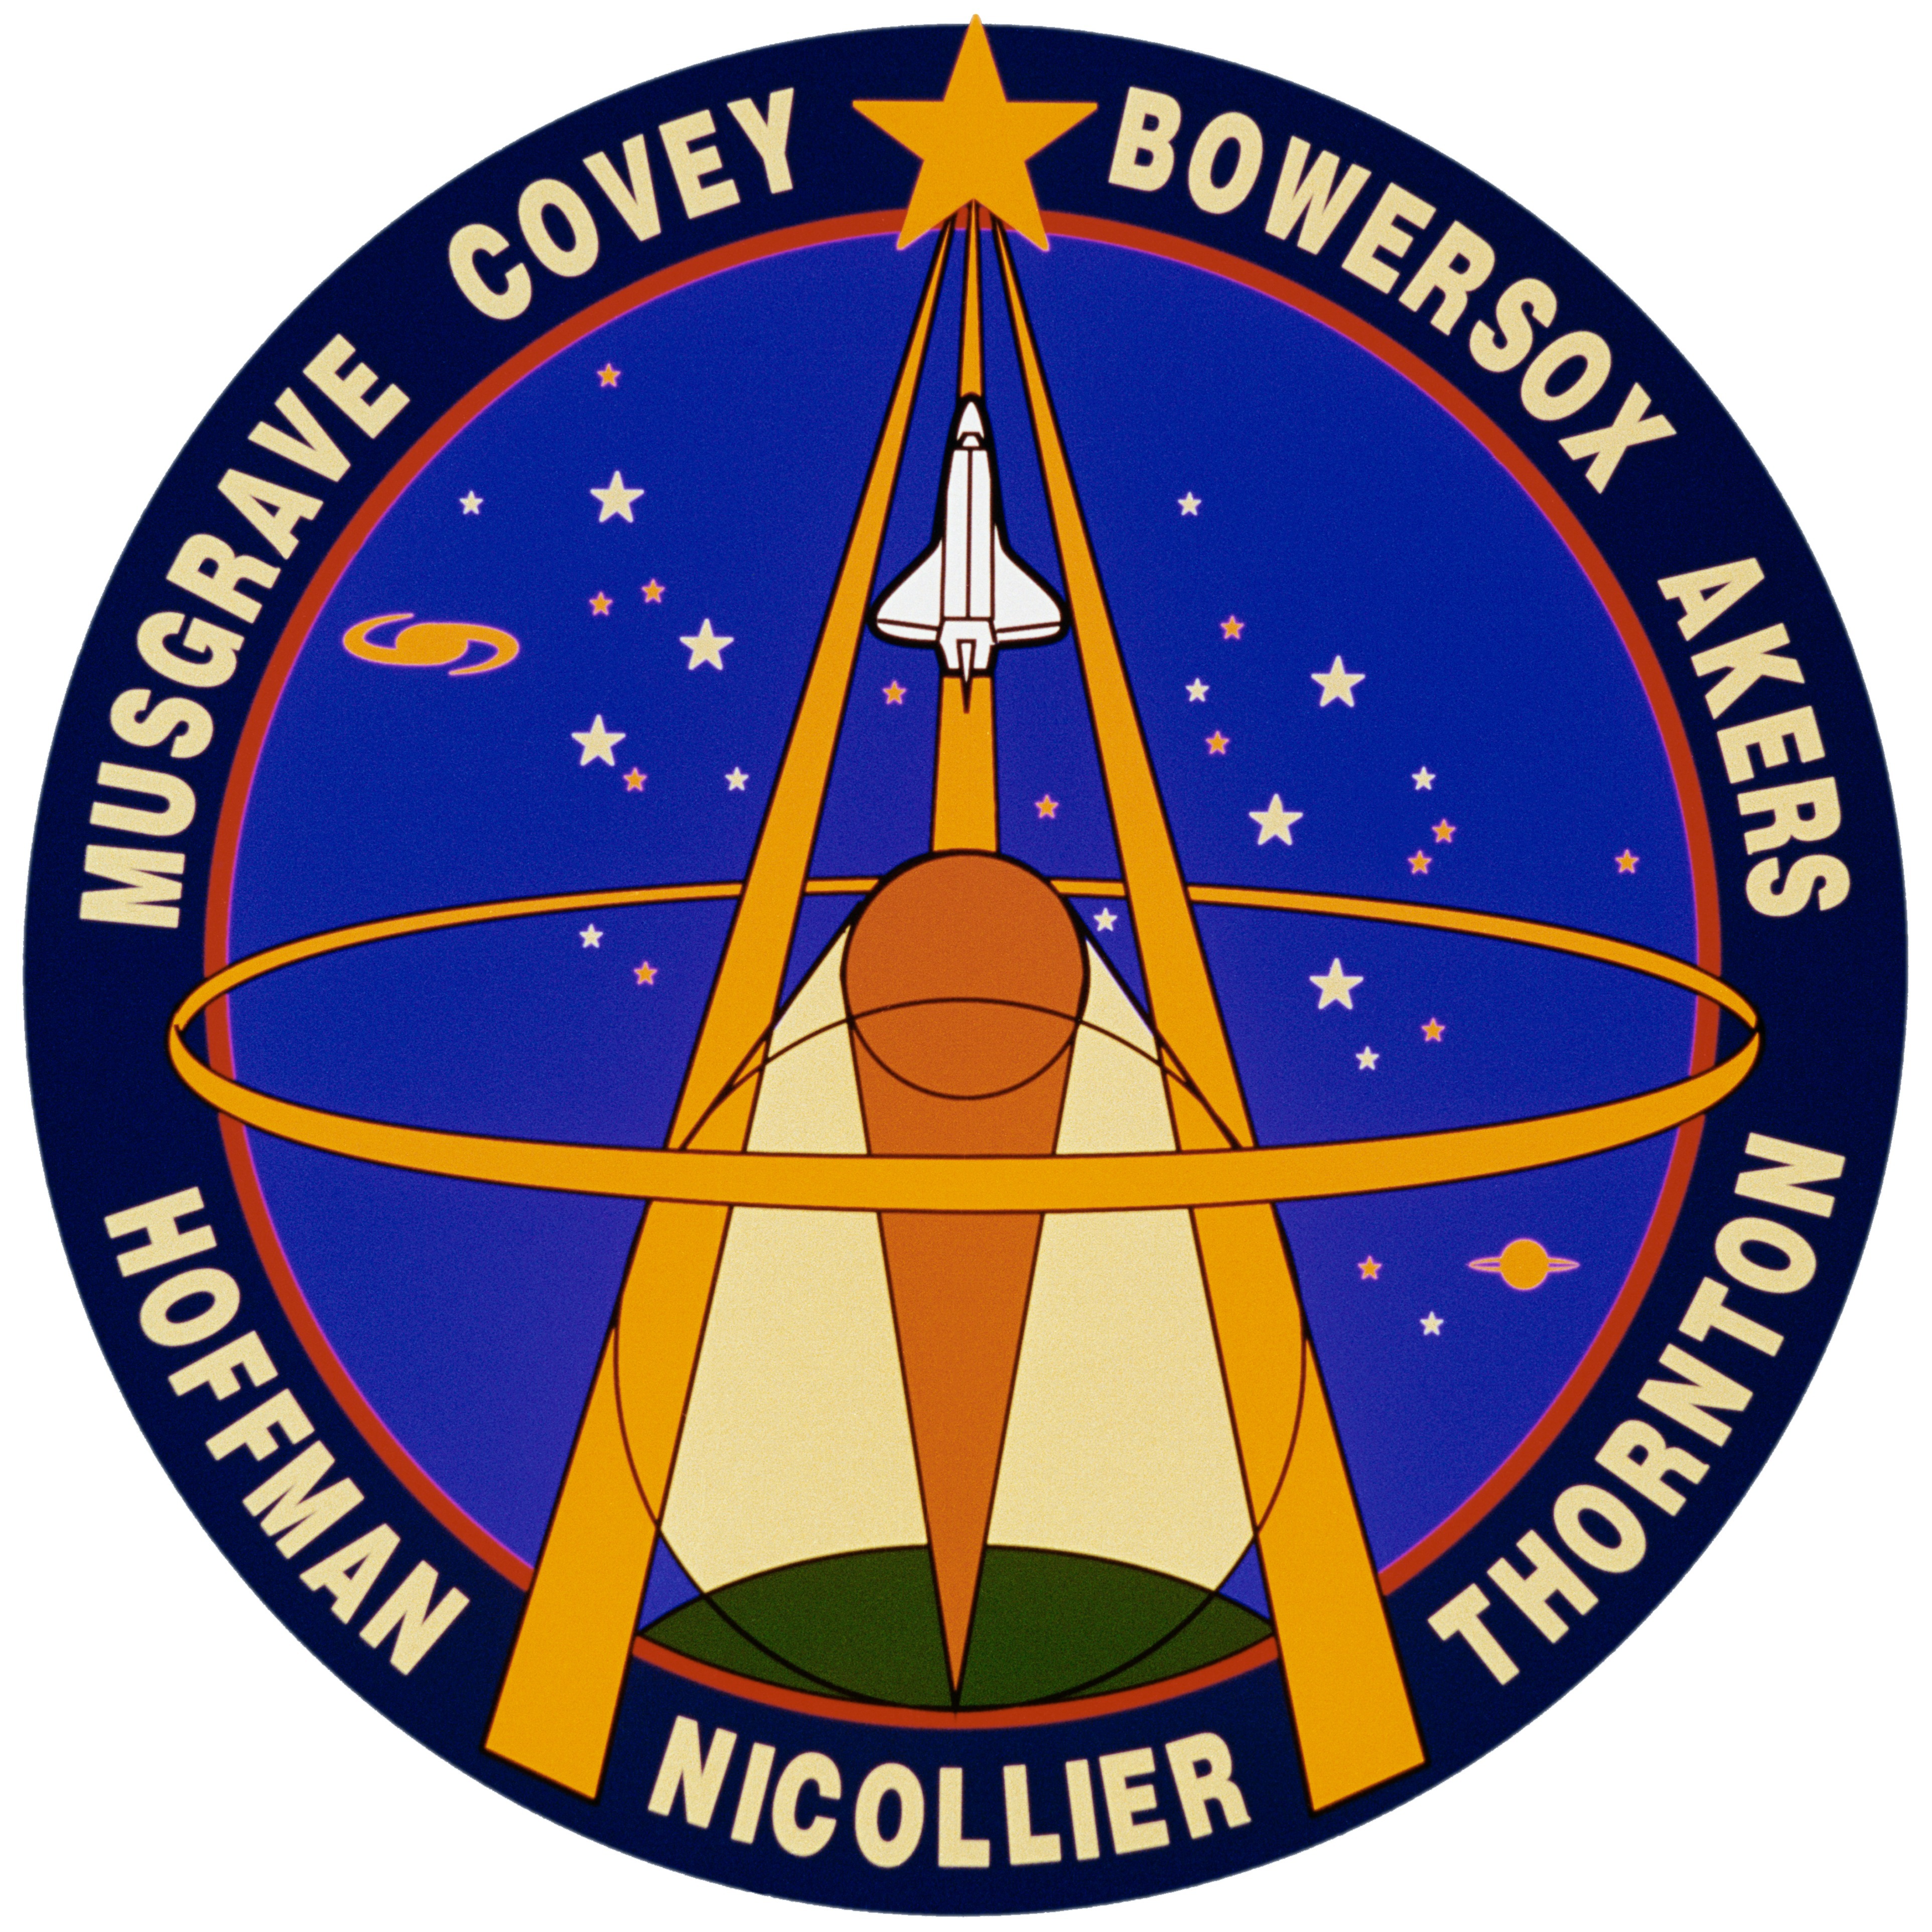 The STS-61 crew patch